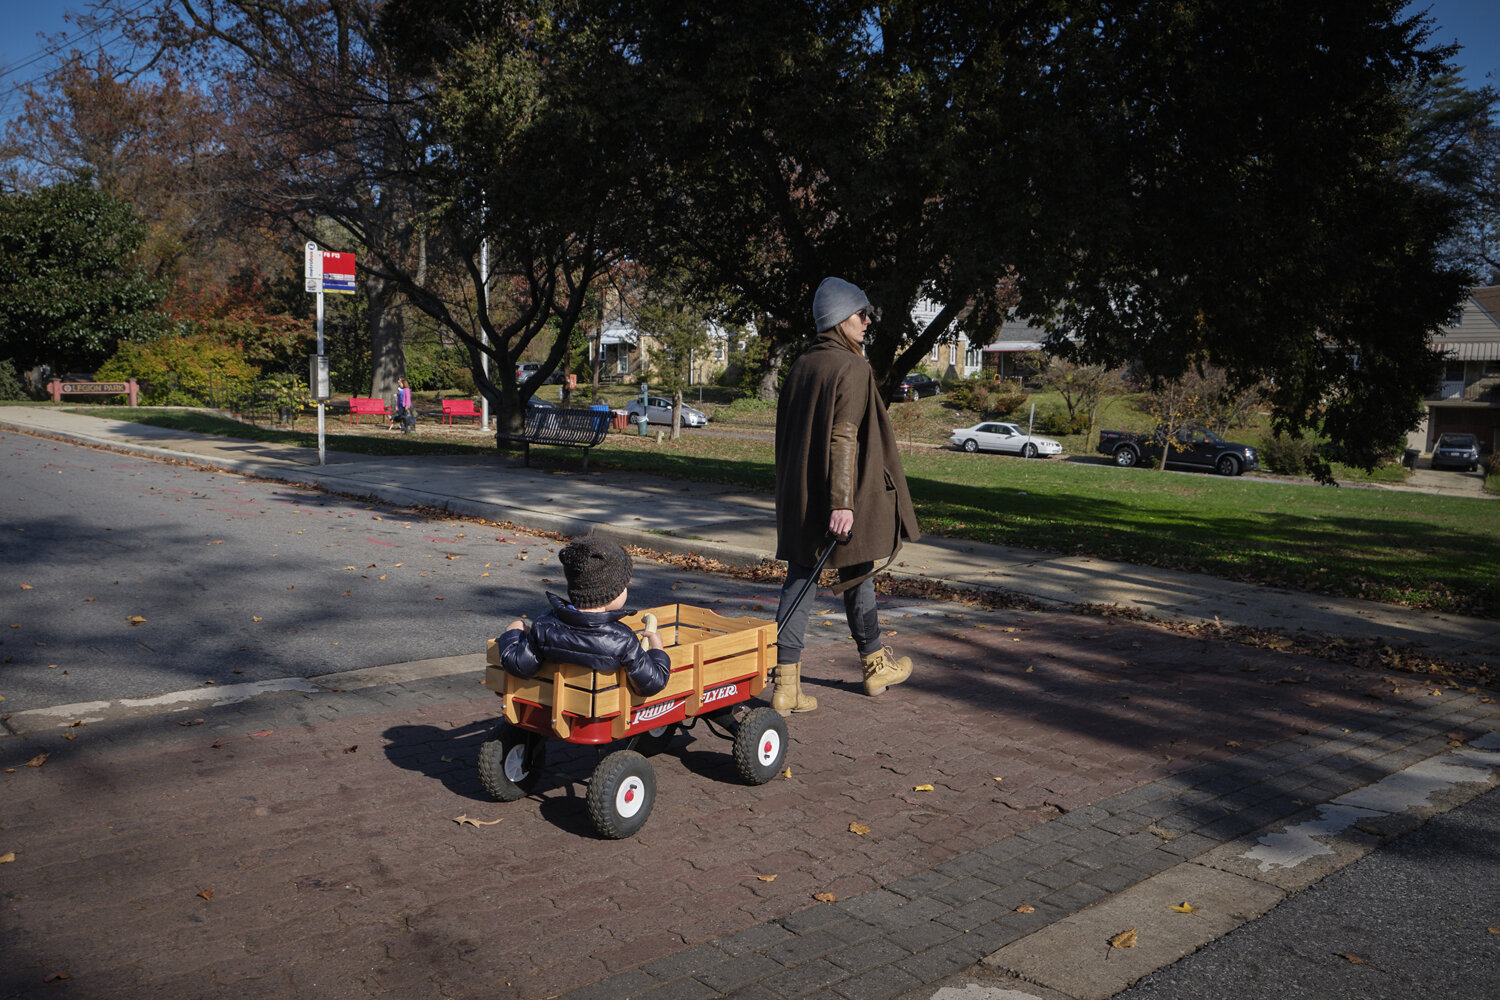  Kathleen pulls her 40 lb child in a Radio Flyer cart on their way to a local park. A single mother who works full time from home, with no childcare help, as even daycares have closed. She feels intensely bad for her son who does not have any friends